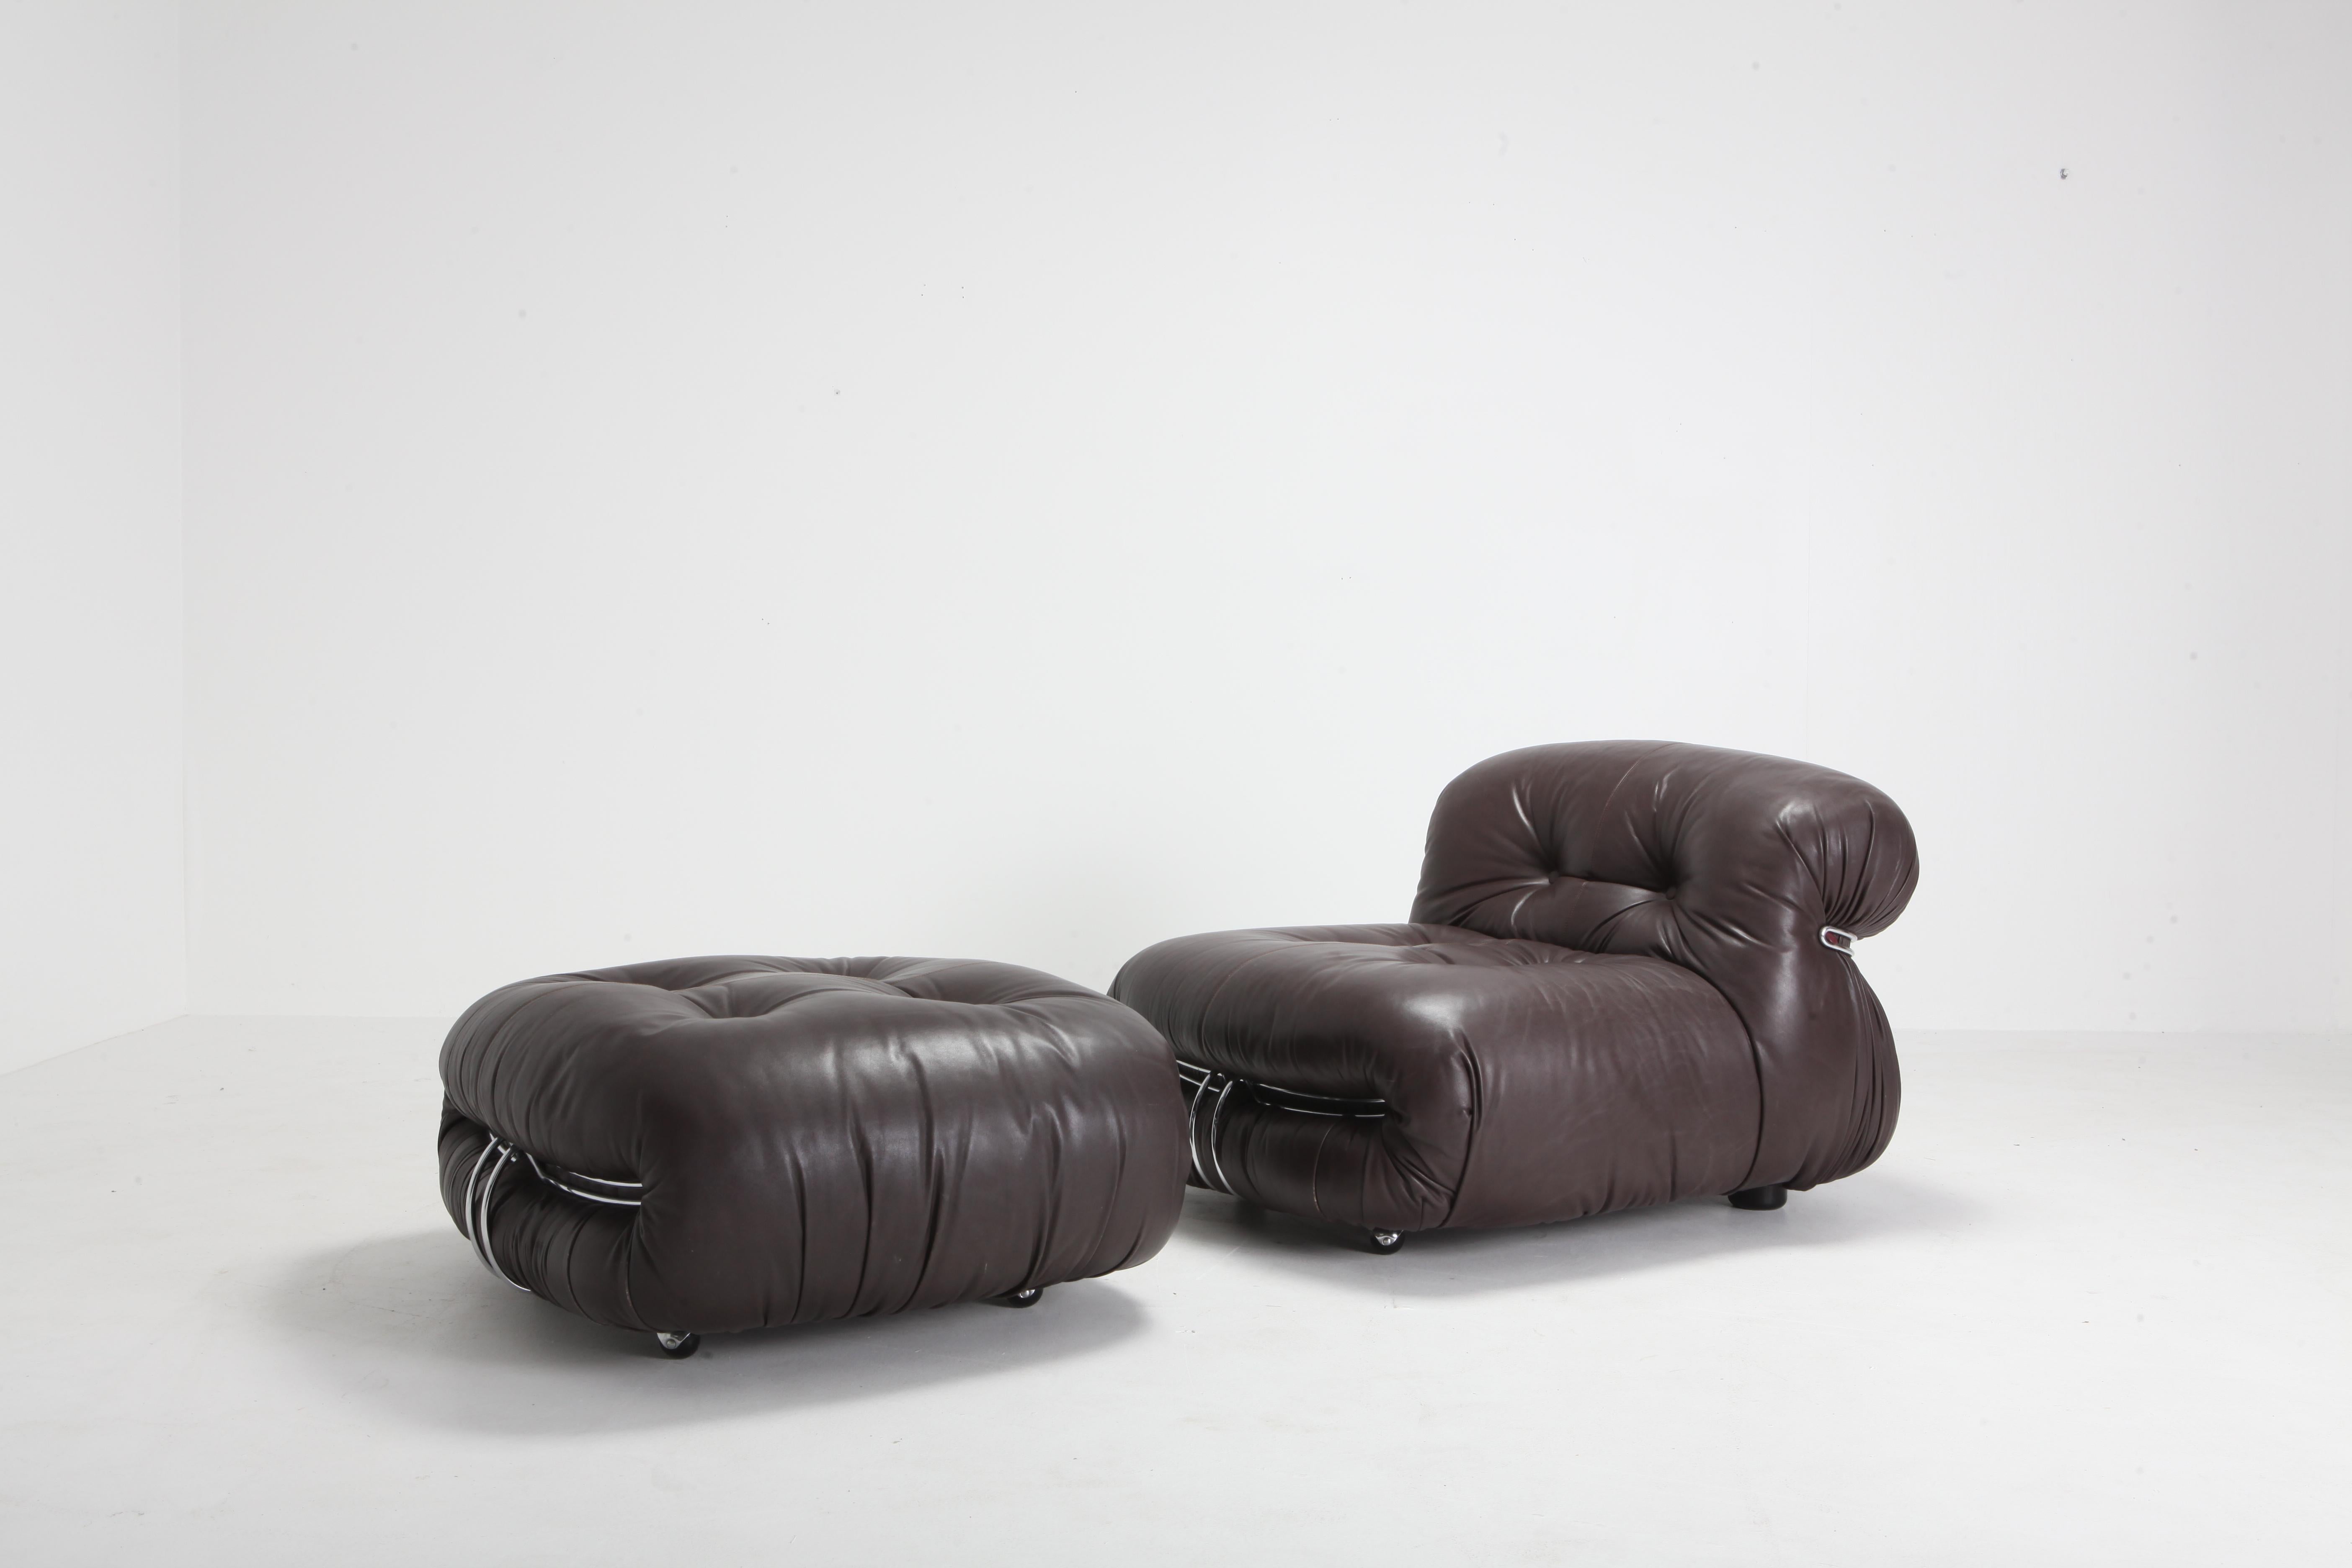 Afra & Tobia Scarpa, 'Soriana' club chair with footstool, dark brown leather and metal, Italy, 1969.
Postmodern piece by Italian designer couple Afra & Tobia Scarpa.
Tufted leather seating and a chromed steel frame.
Tobia & Afra designed for